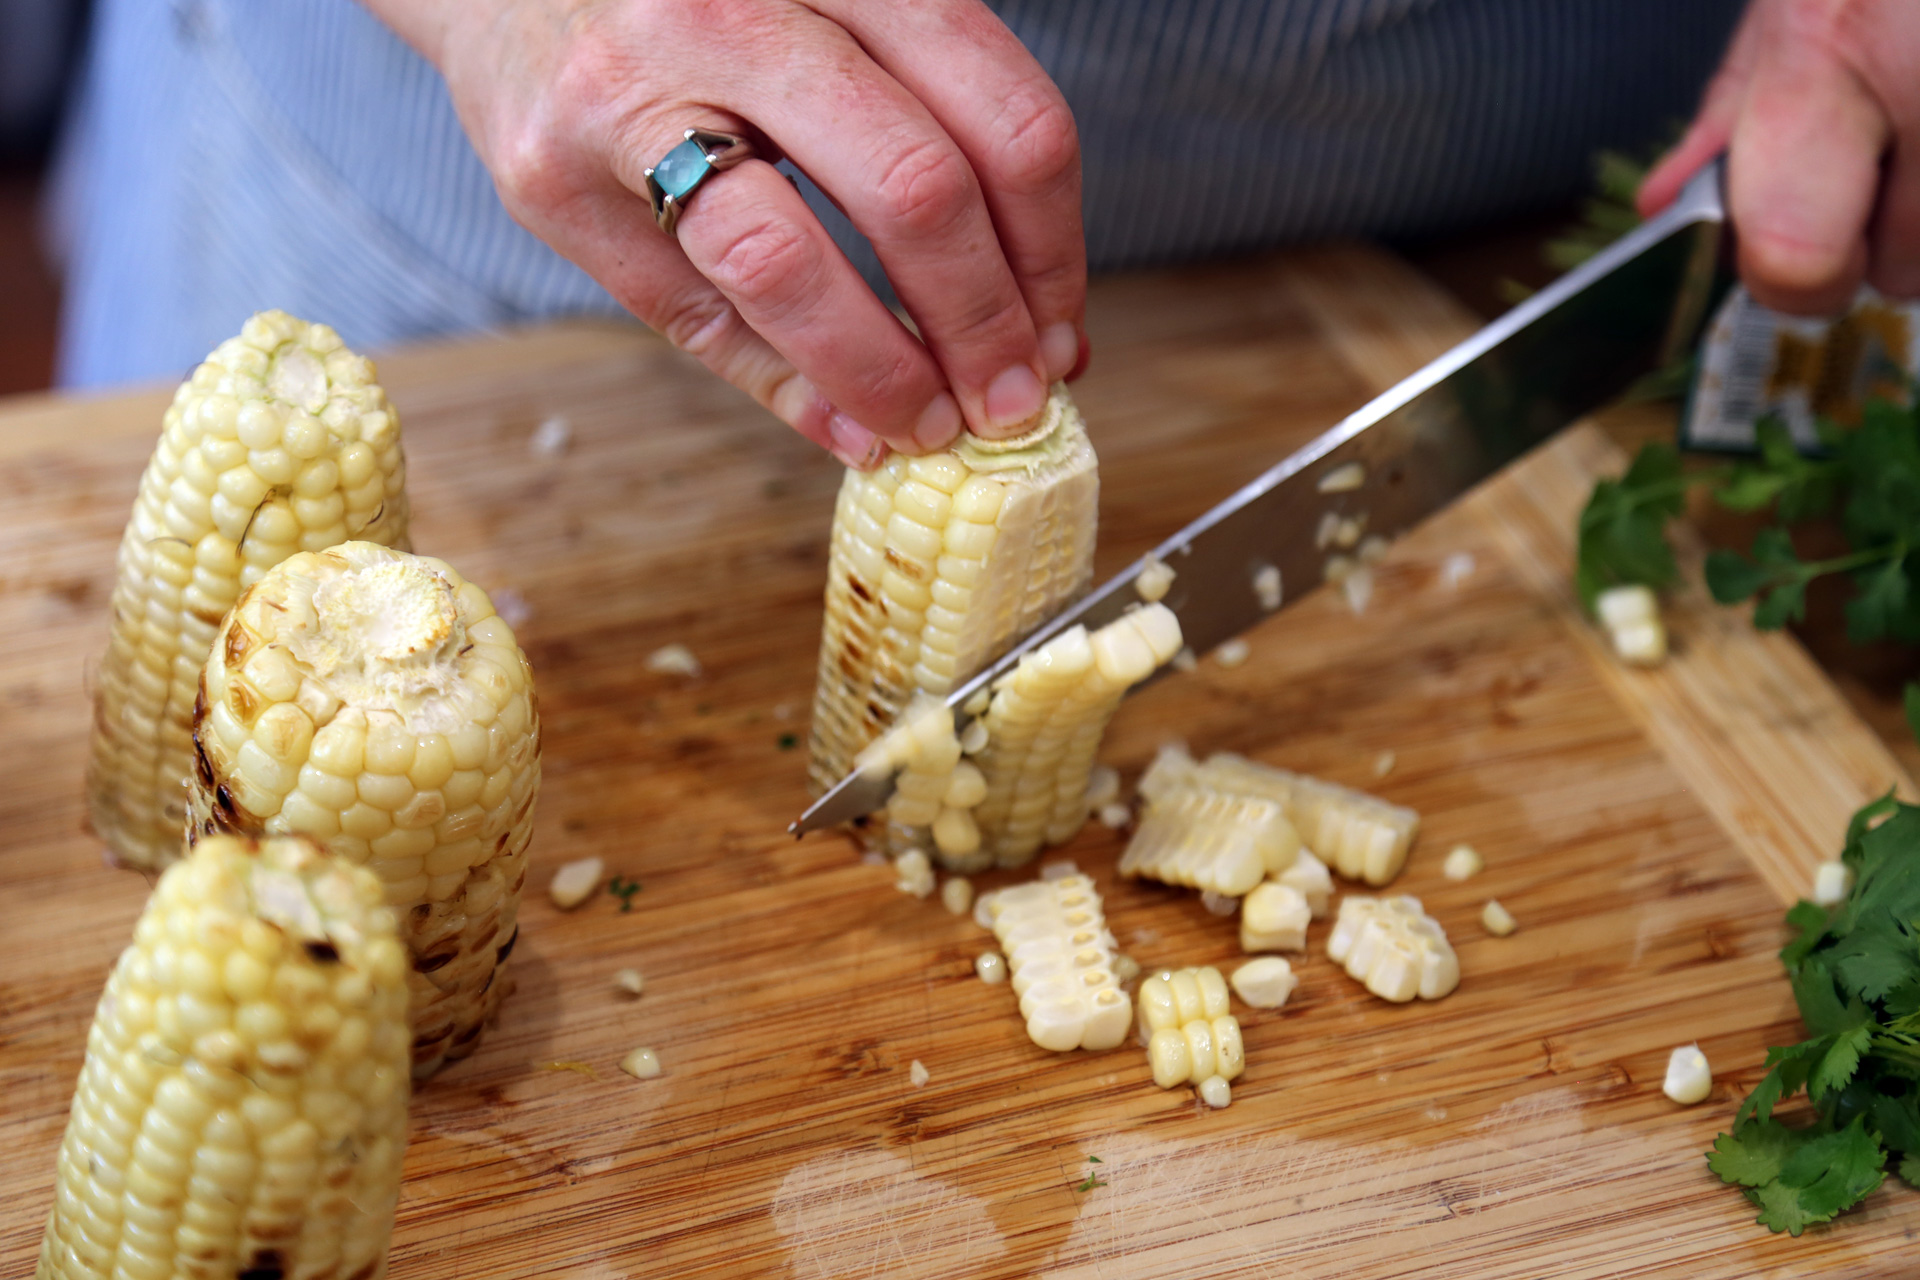 Transfer to a cutting board. Cut the kernels from the corn and place in a shallow serving bowl.